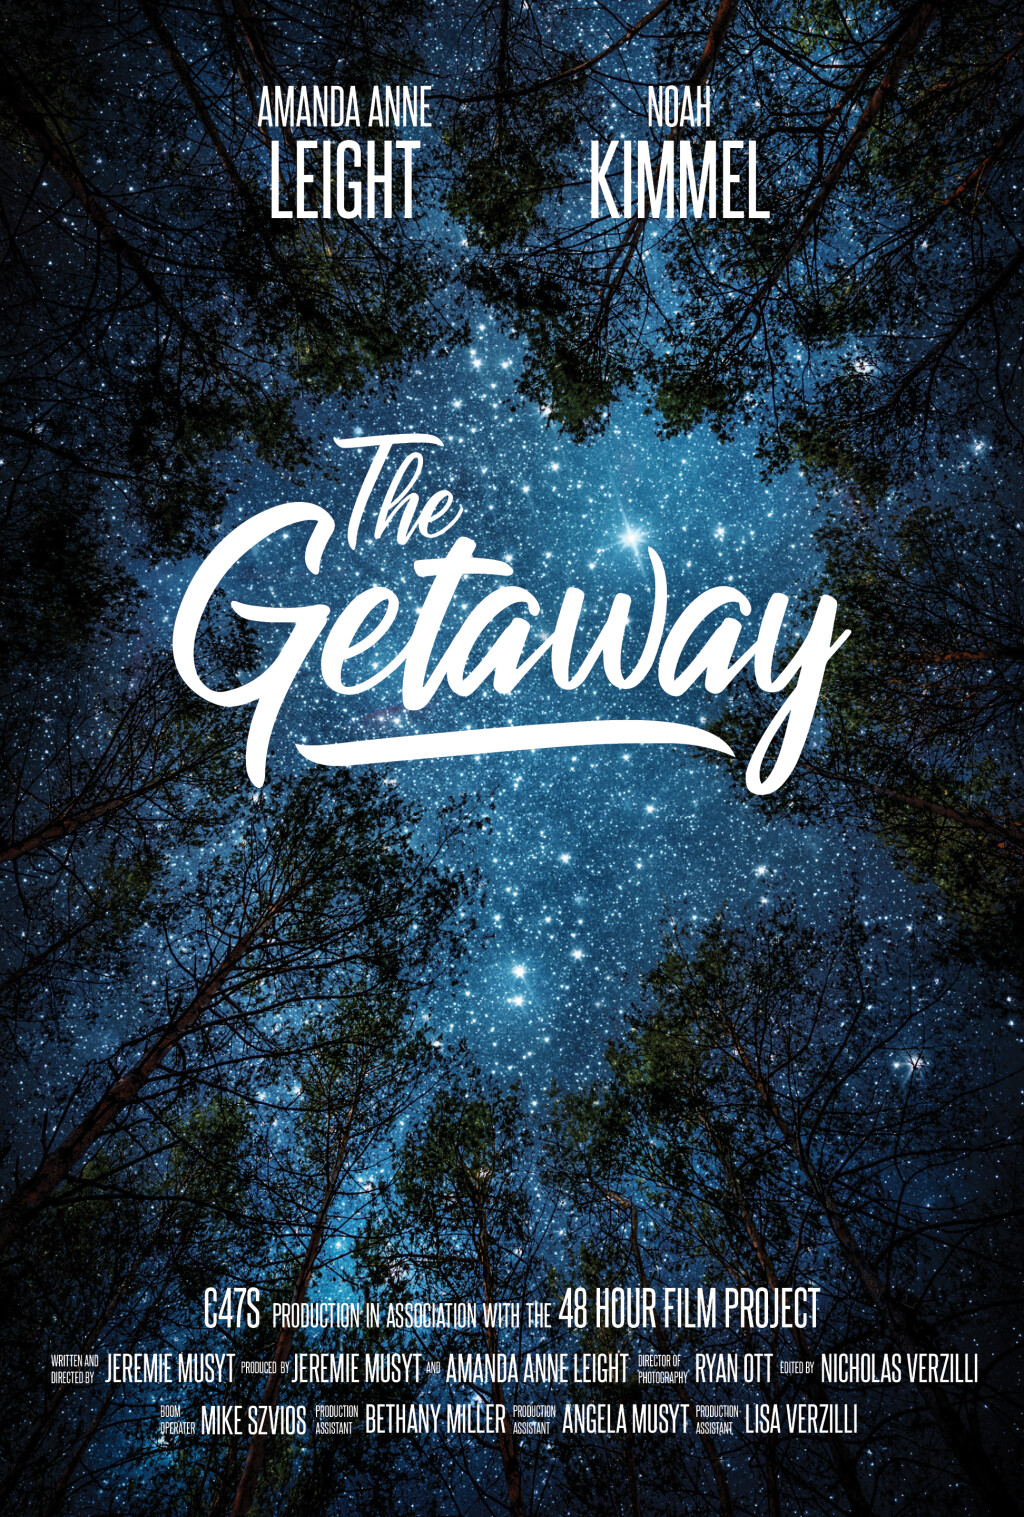 Filmposter for The Getaway